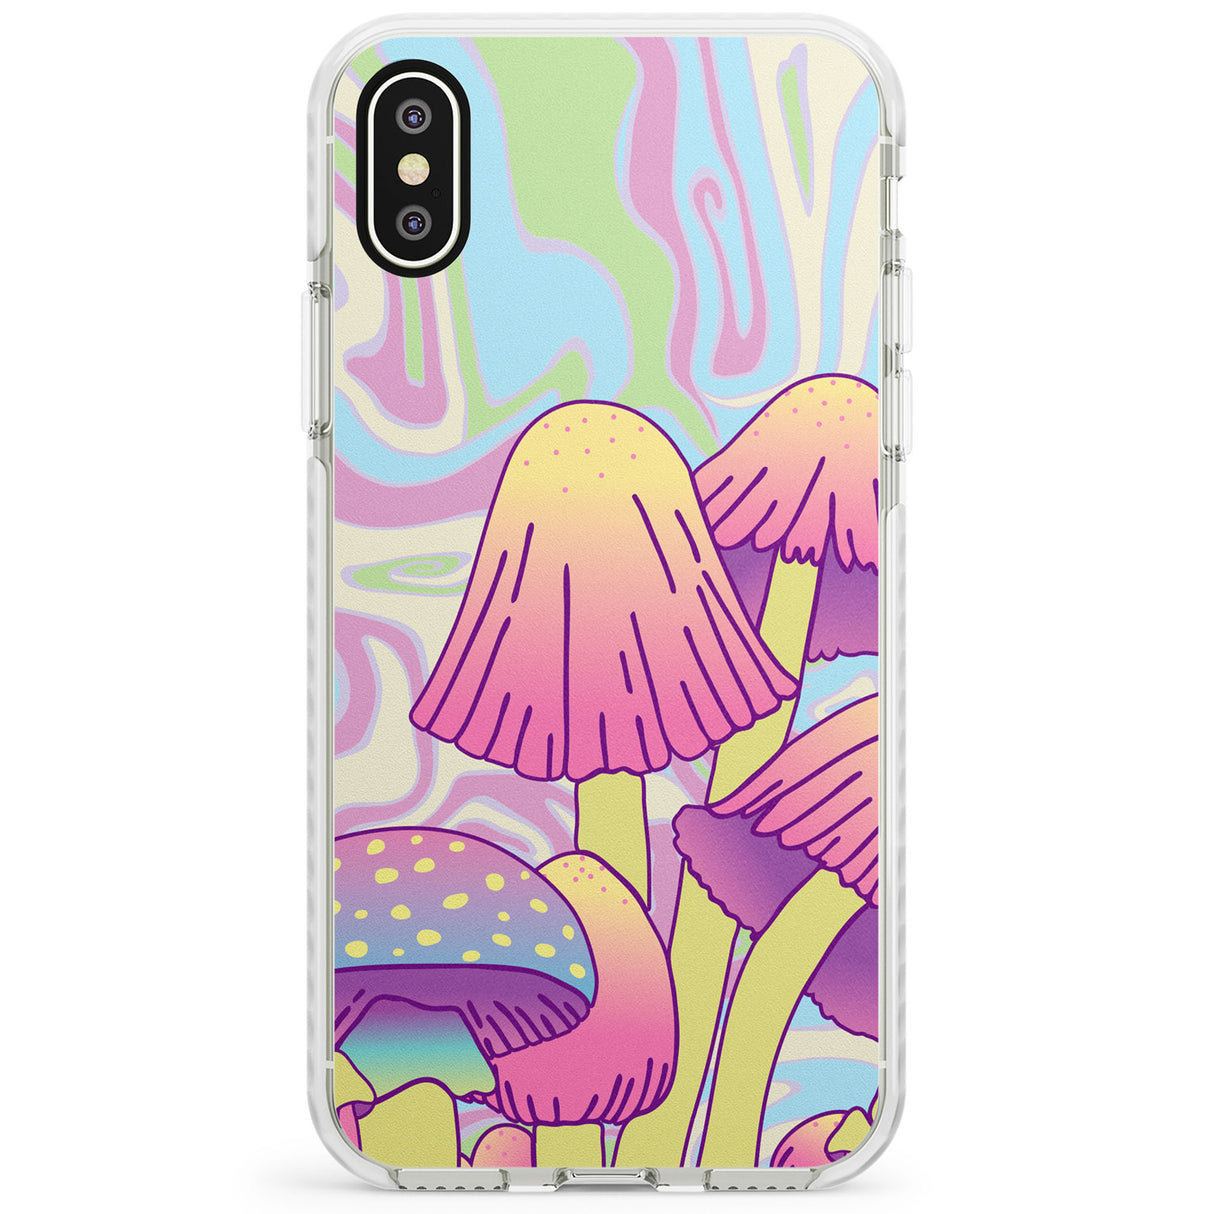 Shroomin' Impact Phone Case for iPhone X XS Max XR